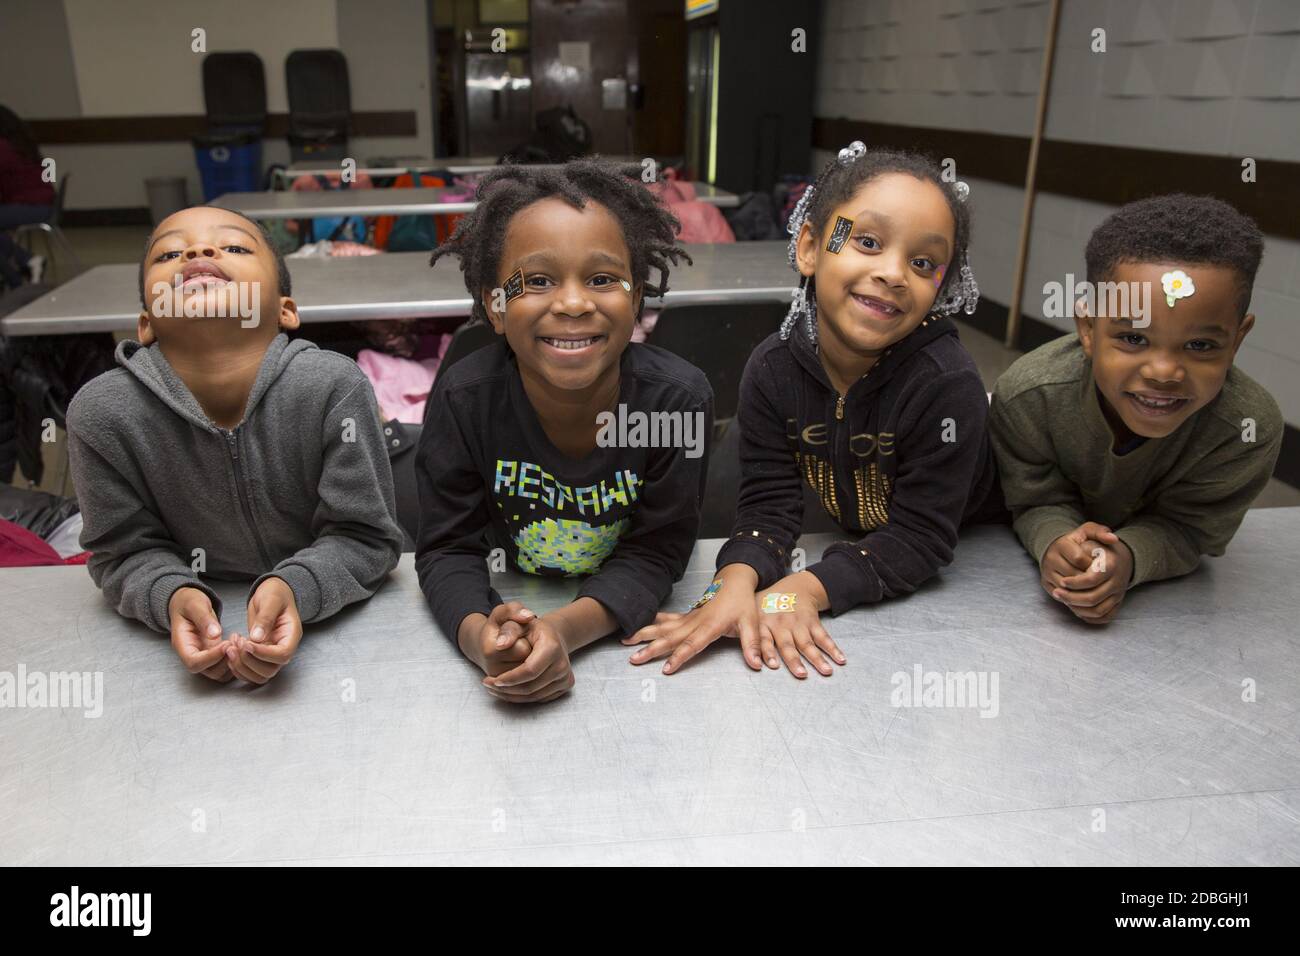 Portrait of a group of elementary school age children at a community center on the Lower East Side of Manhattan, New York City. Stock Photo